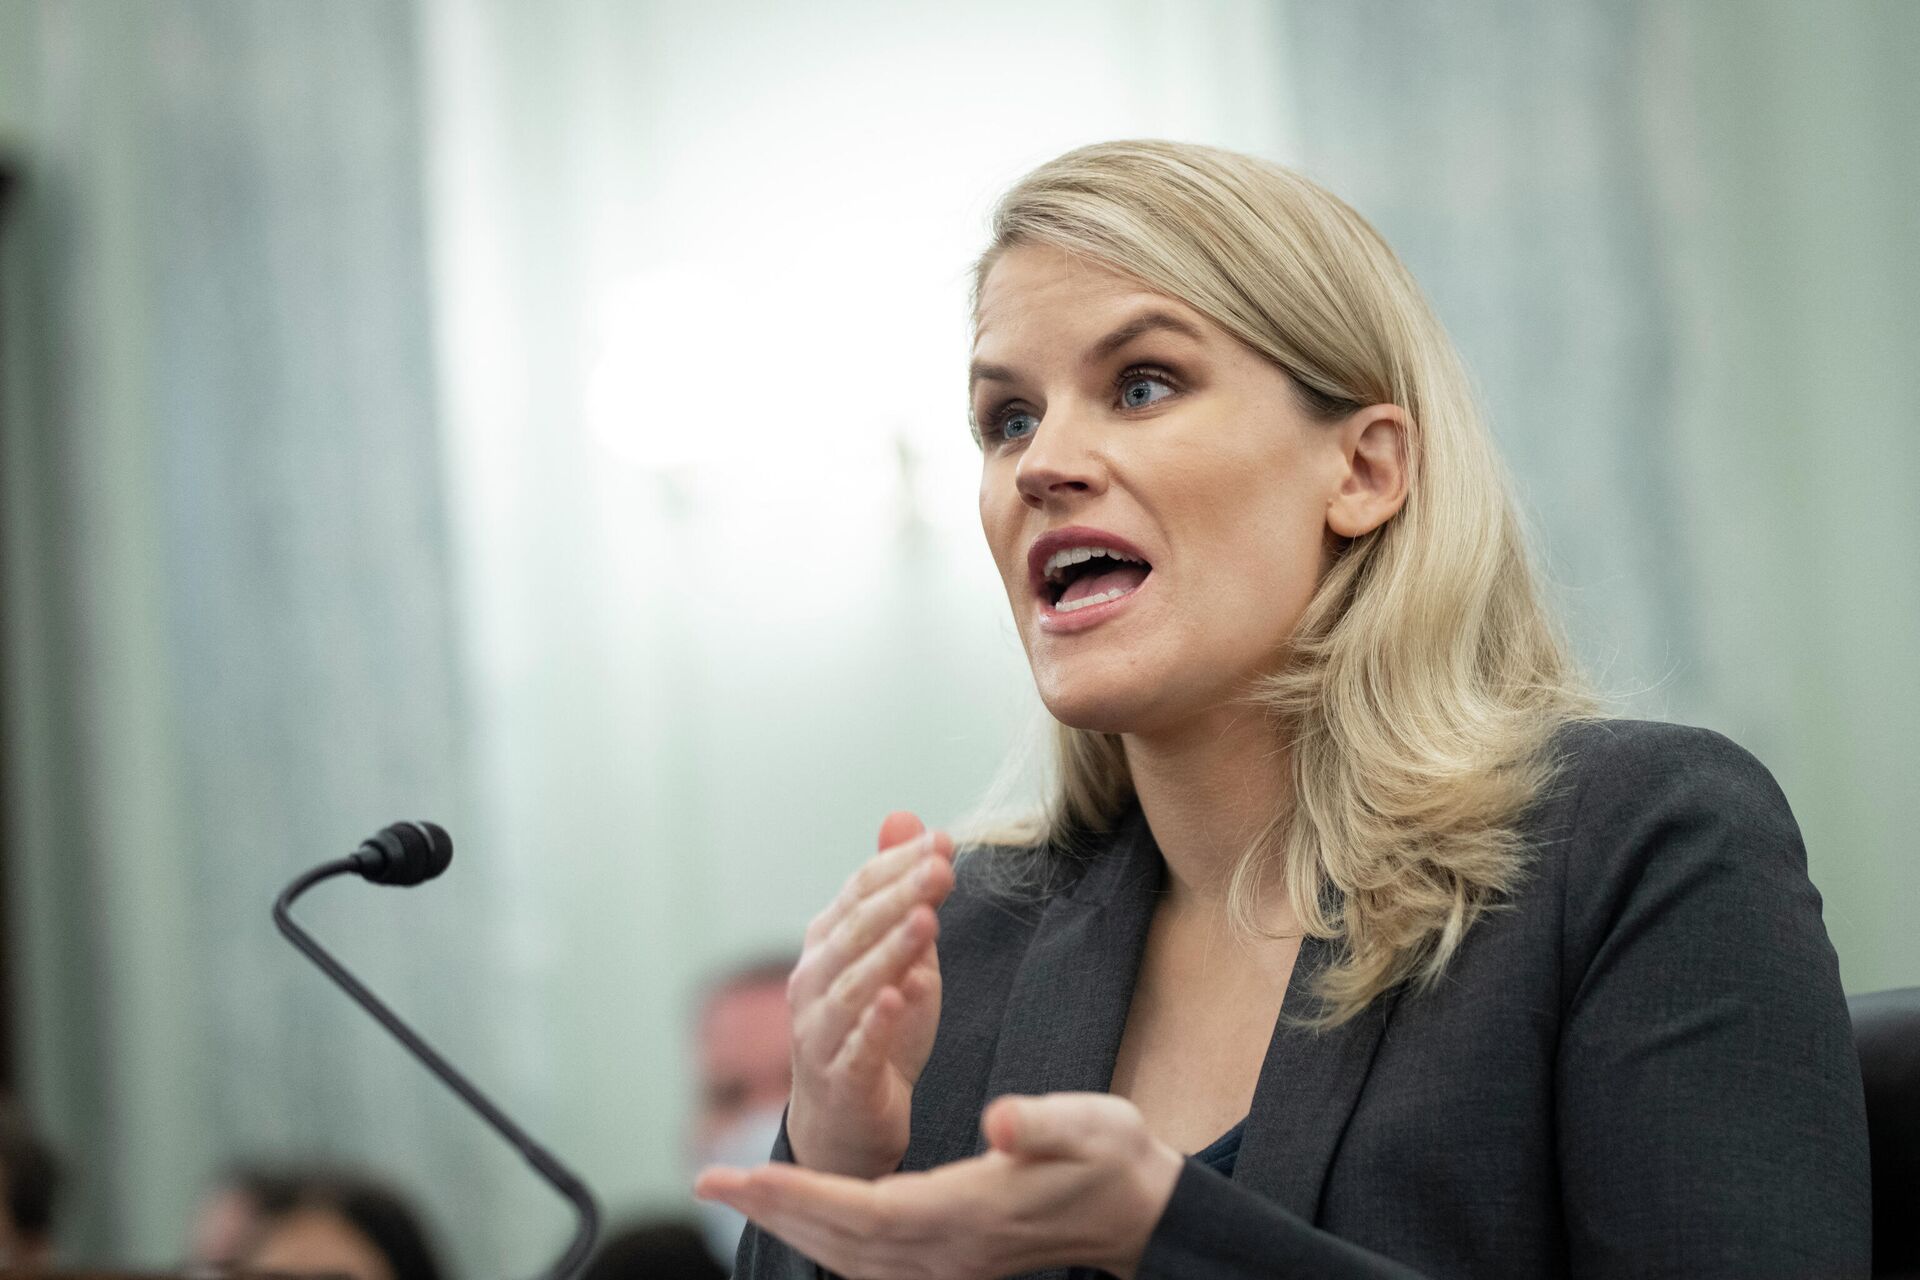 Former Facebook employee and whistleblower Frances Haugen testifies before a Senate Committee on Commerce, Science, and Transportation hearing on Capitol Hill, October 5, 2021, in Washington, DC.  - Sputnik International, 1920, 24.10.2021